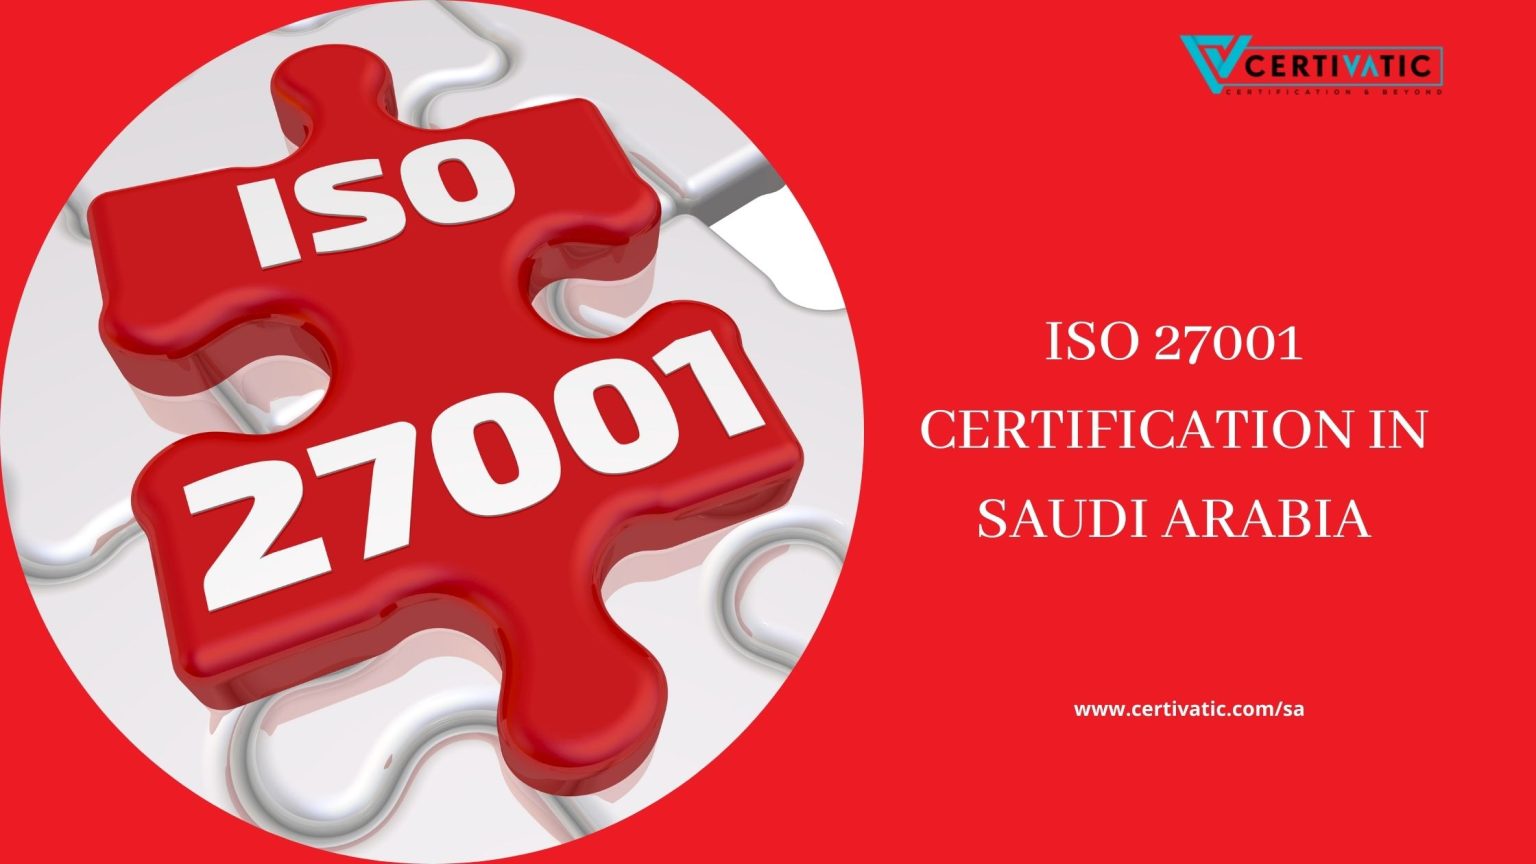 How to Acheive ISO 27001 Certification in Saudi Arabia in 8 Easy steps?